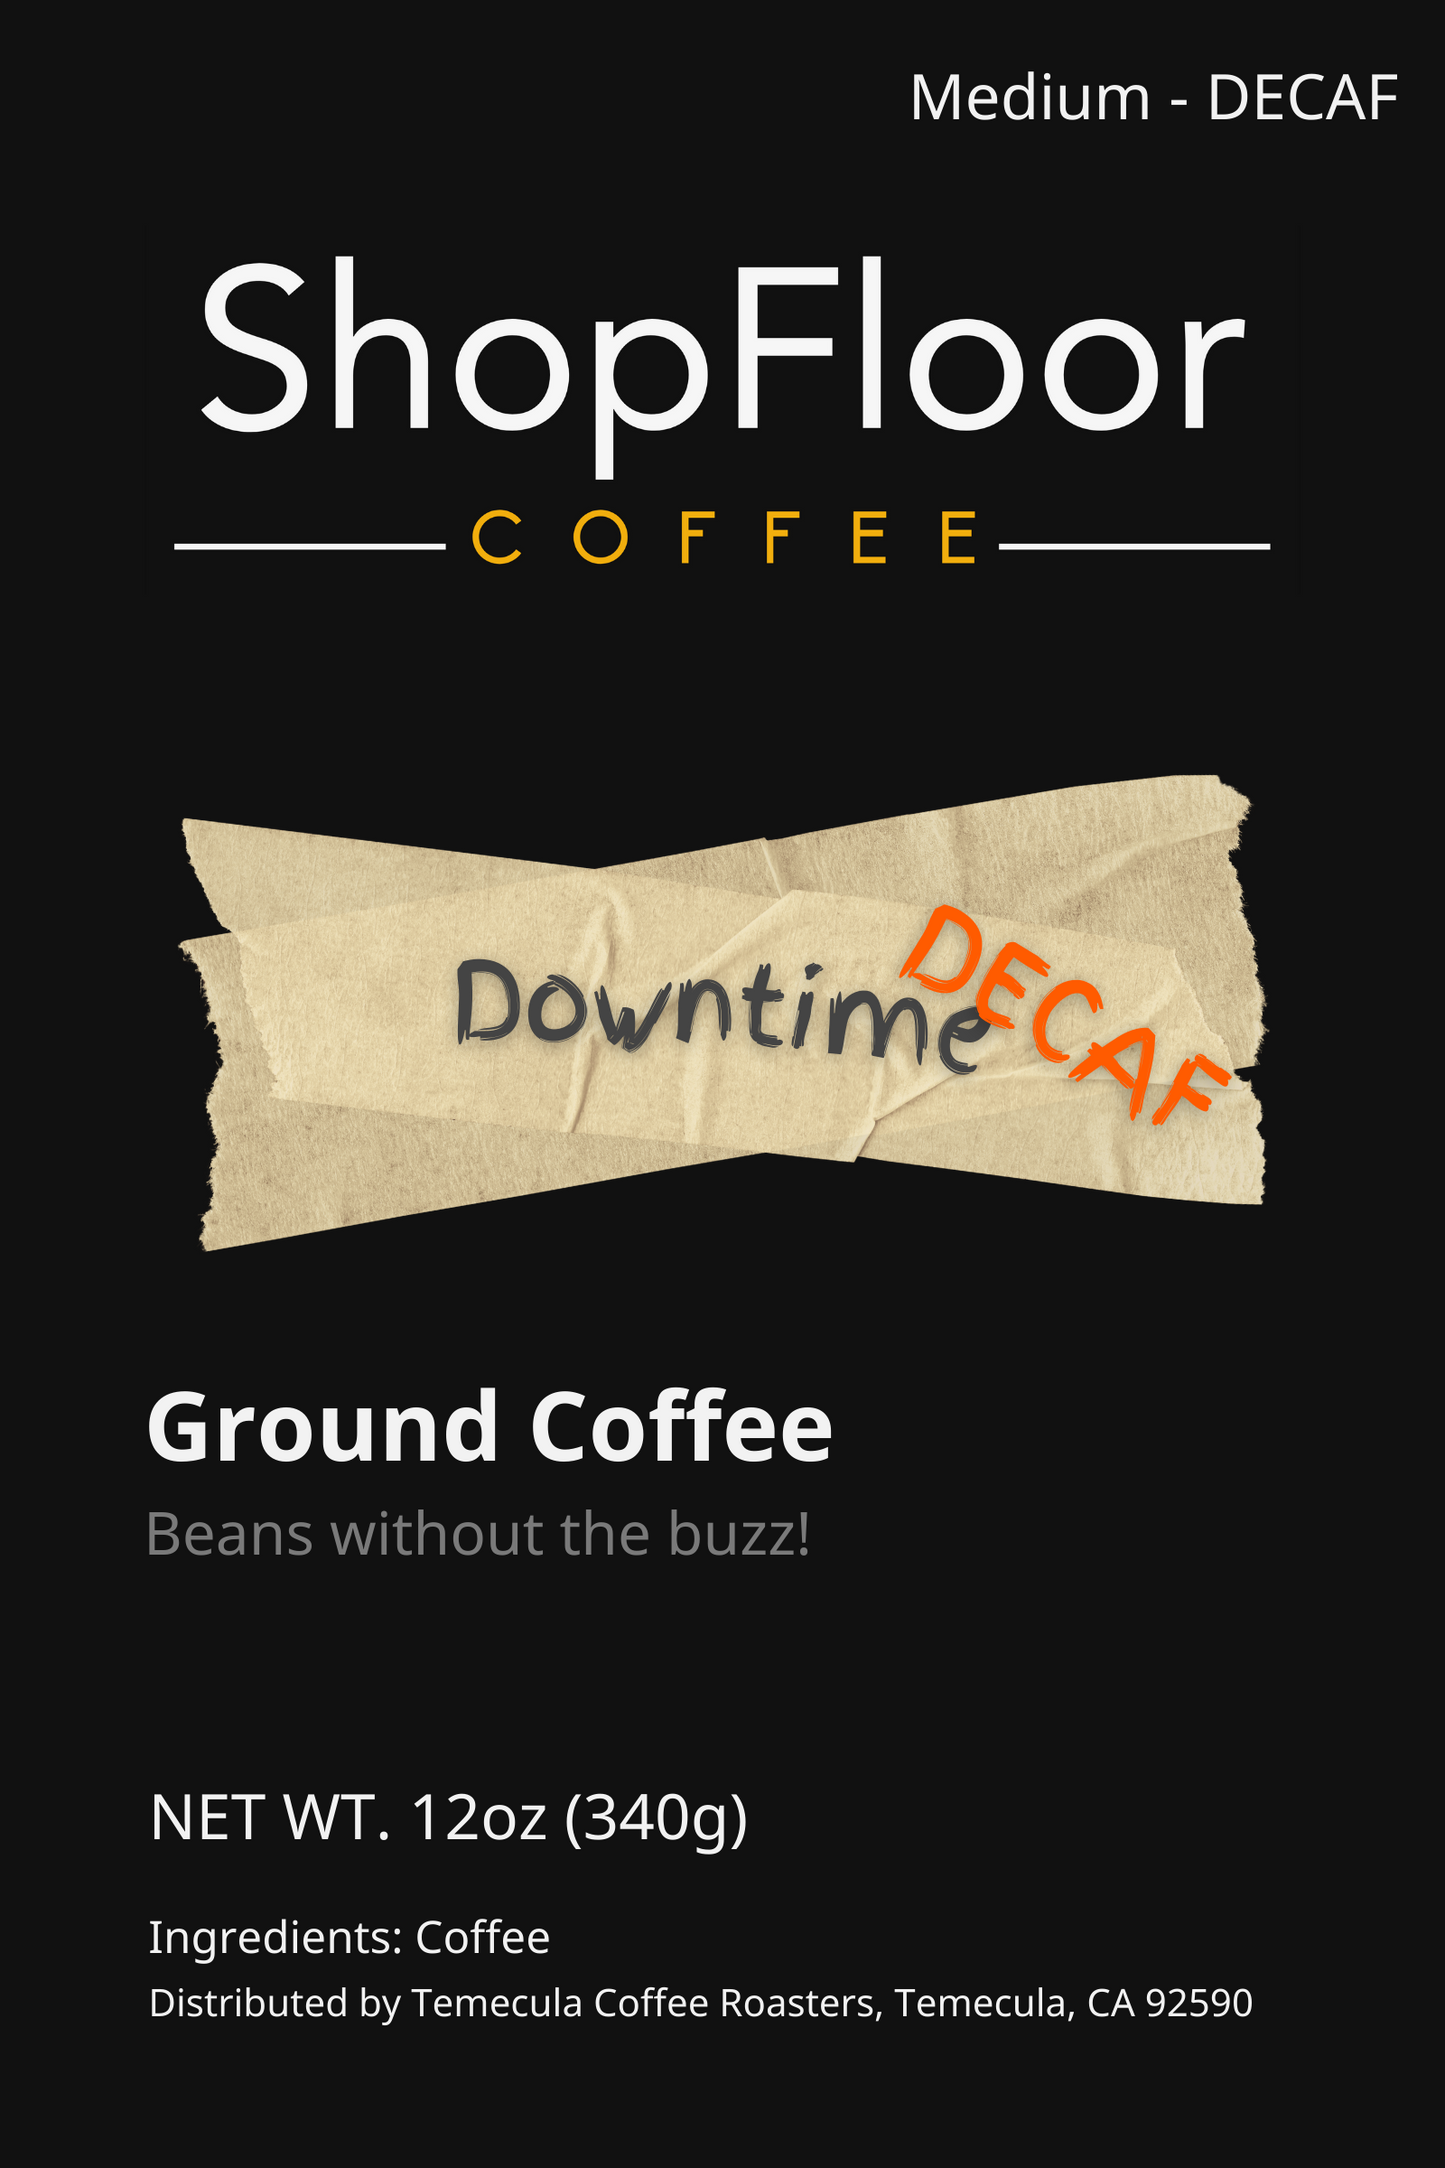 Downtime Decaf